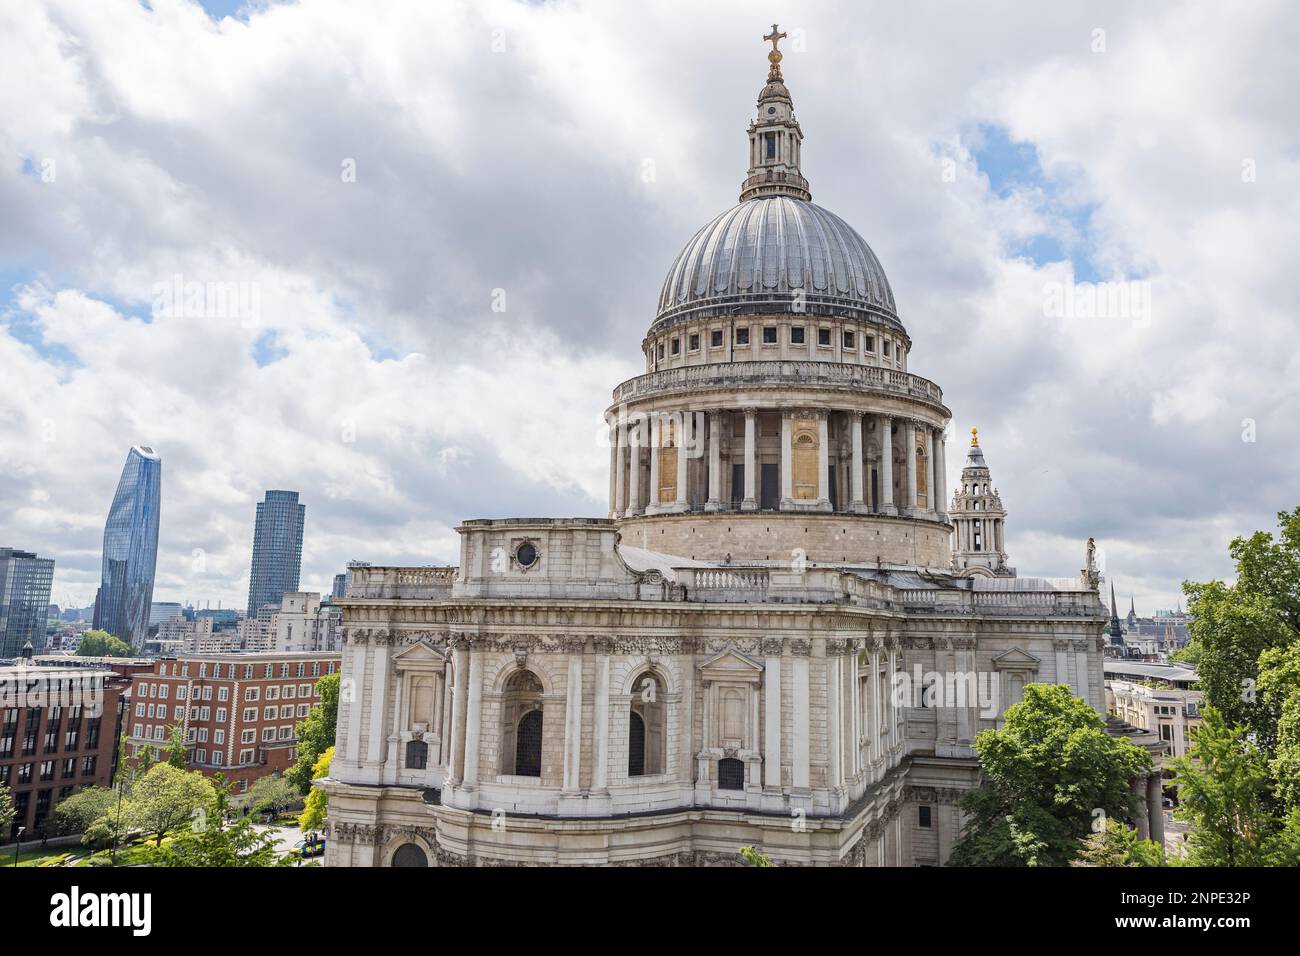 St Pauls Cathedral in London pictured from a high viewpoint under clouds. Stock Photo